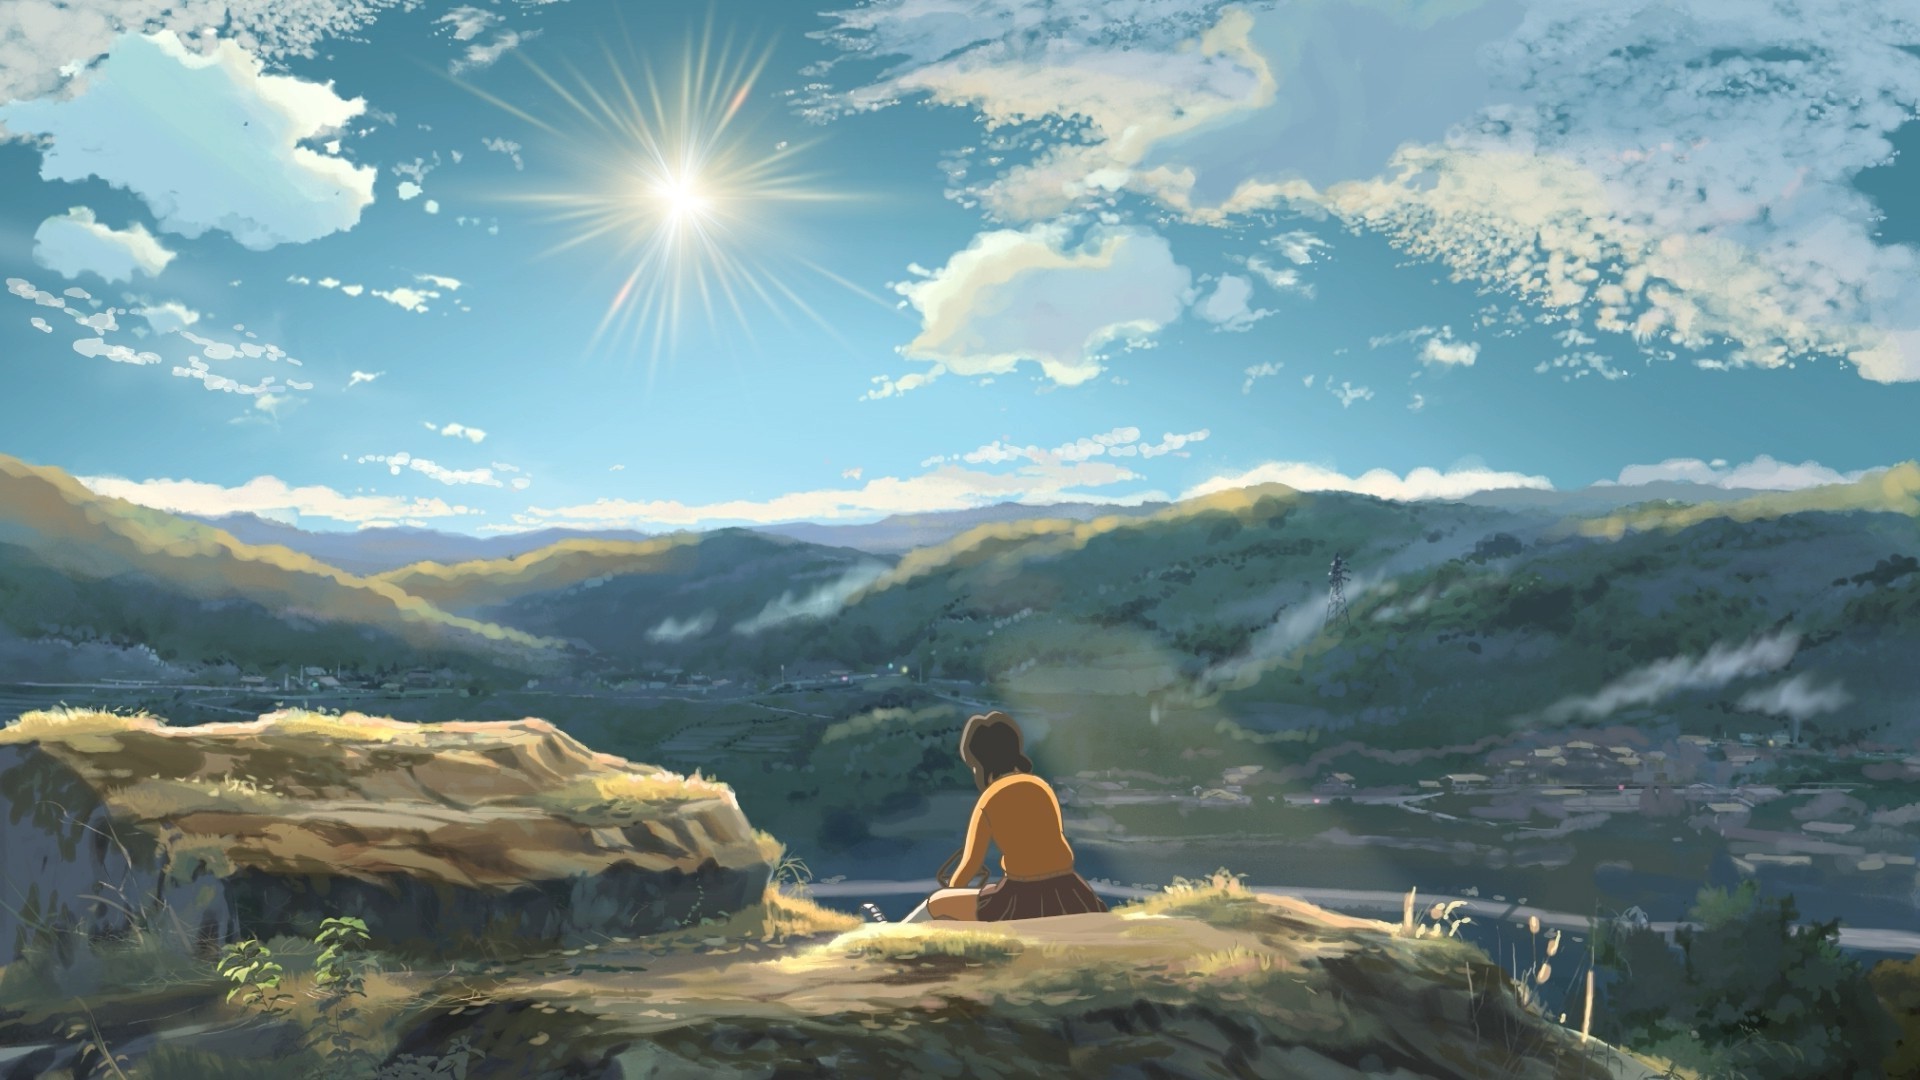 1920x1080  free wallpapers anime landscape download high definiton wallpapers  desktop images free hi res computer wallpapers cool best artwork 1920Ã—1080  ...